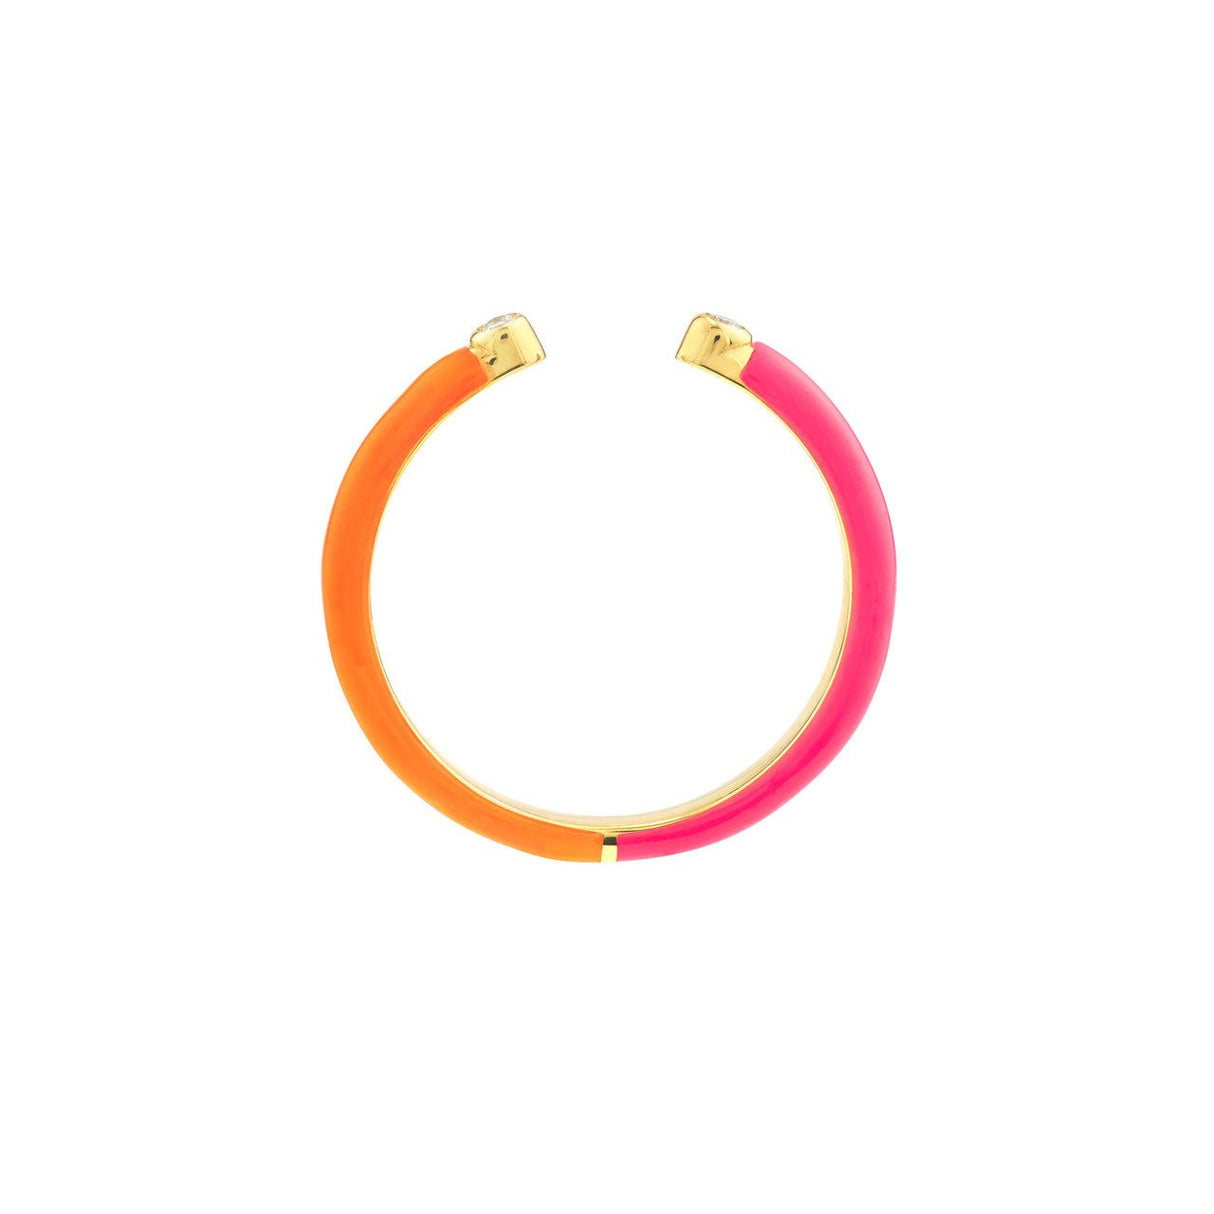 This exquisite 14K gold ring from the Diamond Origin 2023 collection features a 3pt diamond cuff with two tones of enamel half pink and half orange that will give your look a unique and eye catching twist. Its classic gold stackable design adds a touch of sophistication to any ensemble.